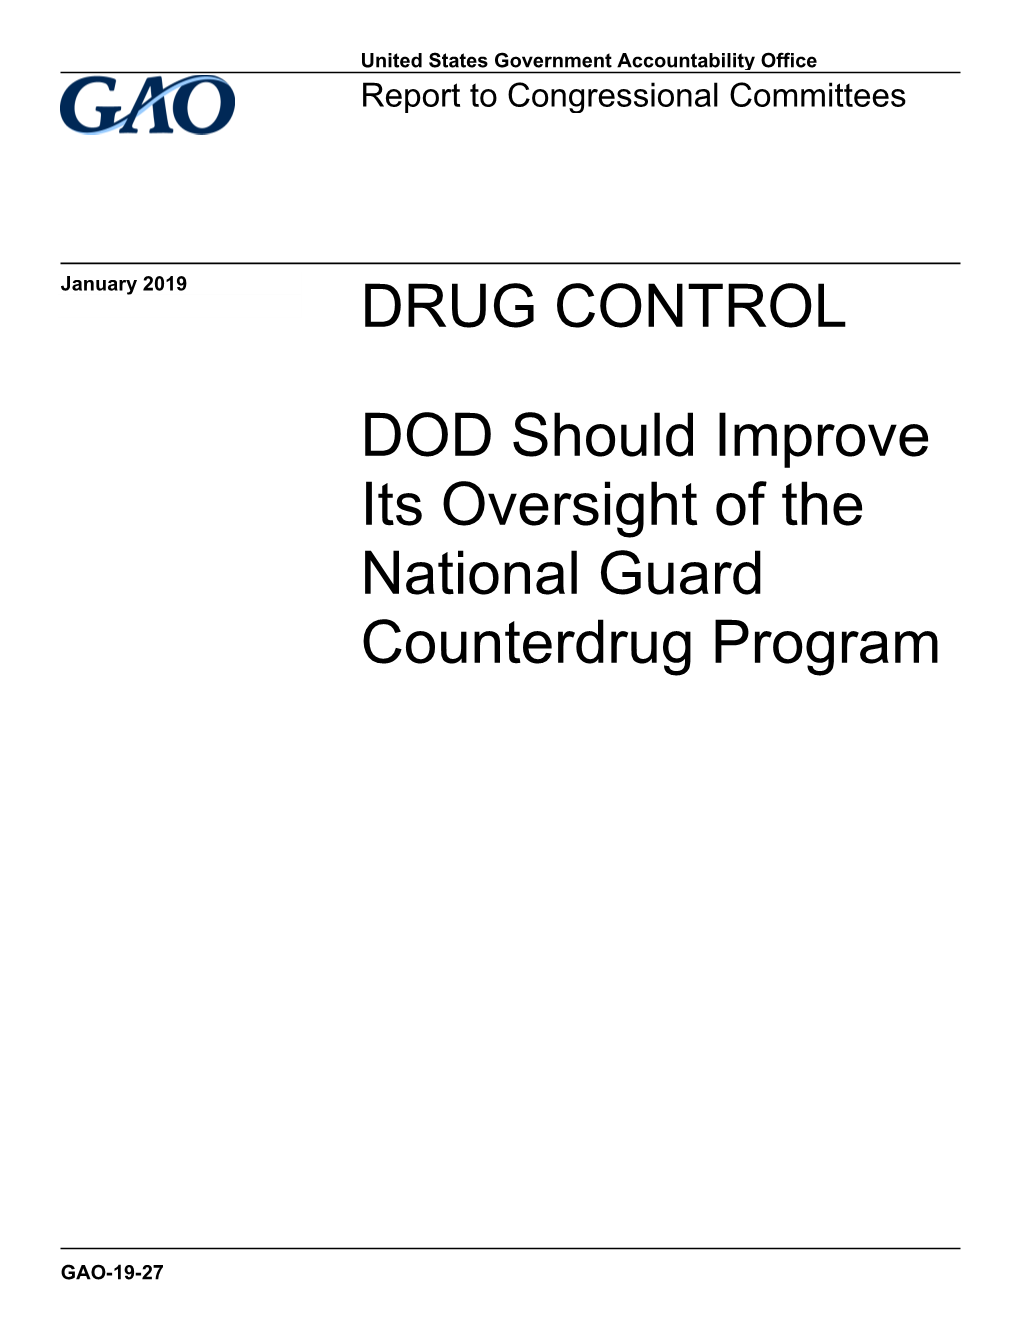 DOD Should Improve Its Oversight of the National Guard Counterdrug Program